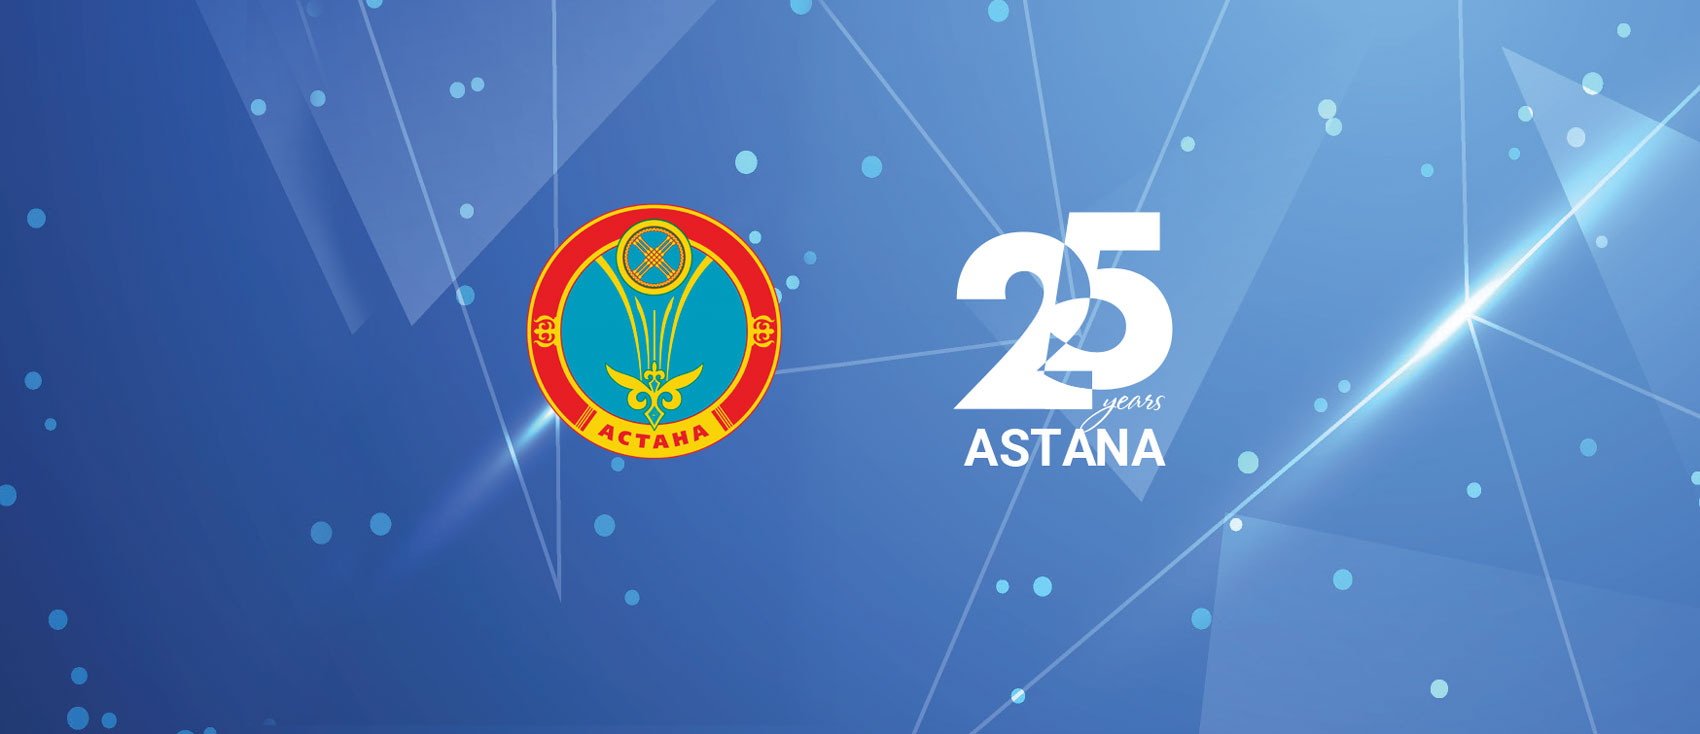 A Remarkable Presence at Astana’s International Forum of Mayors